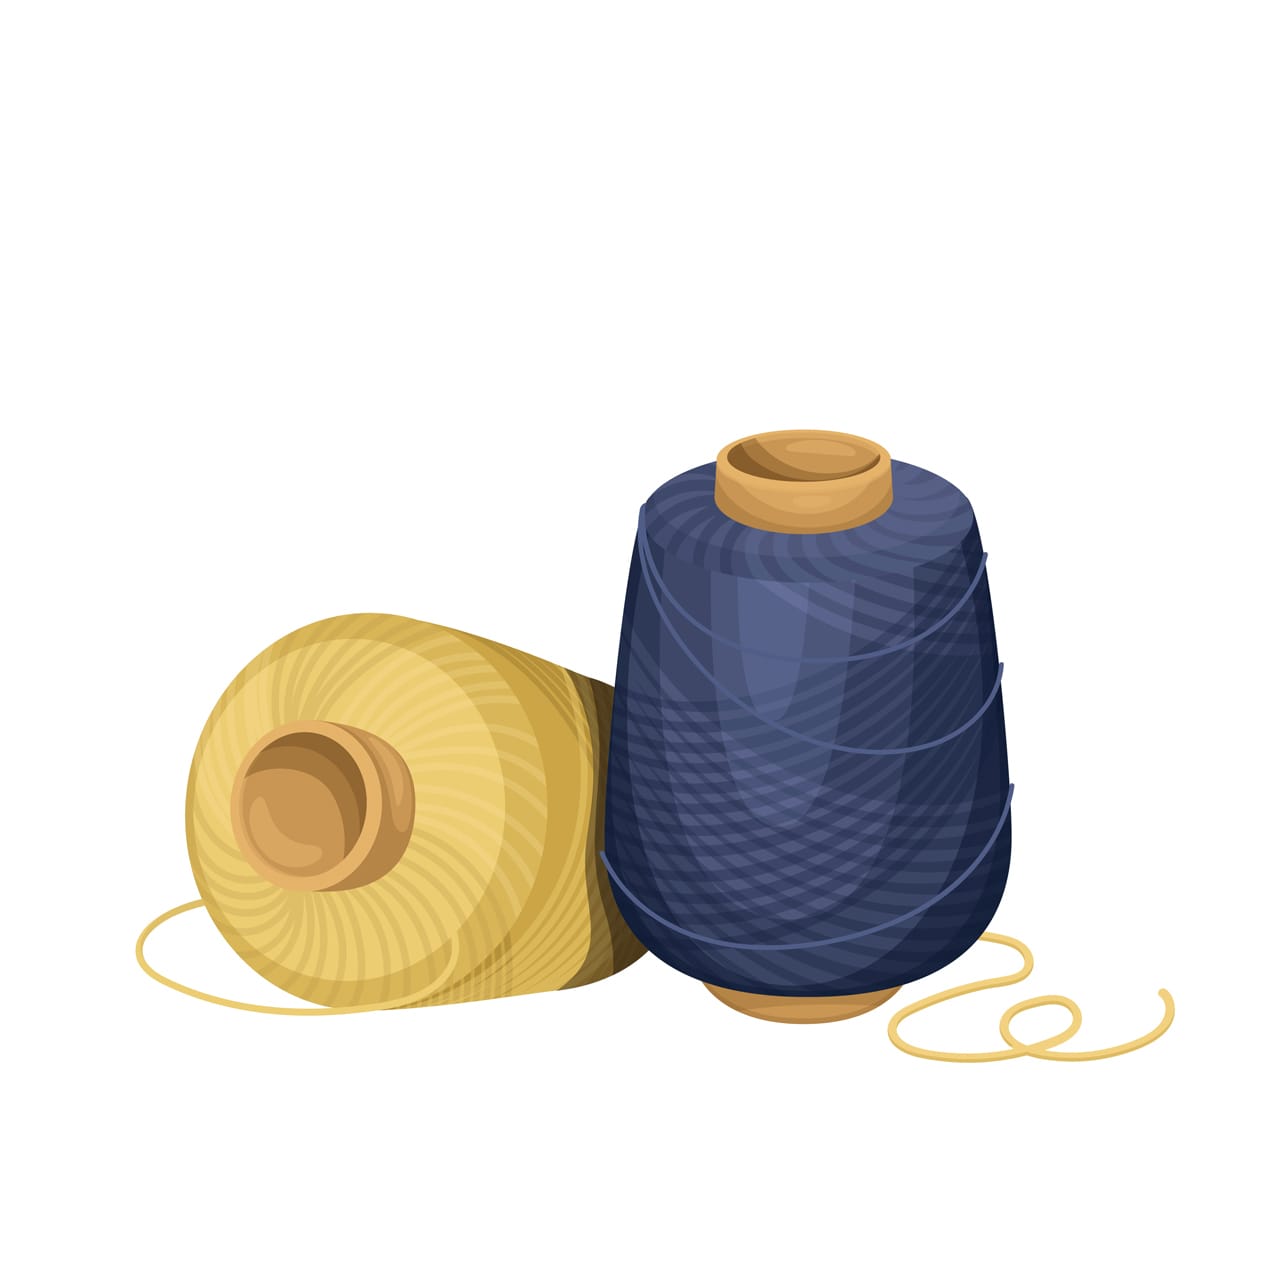 Wool clipart spools with colored thread hand drawing sketch